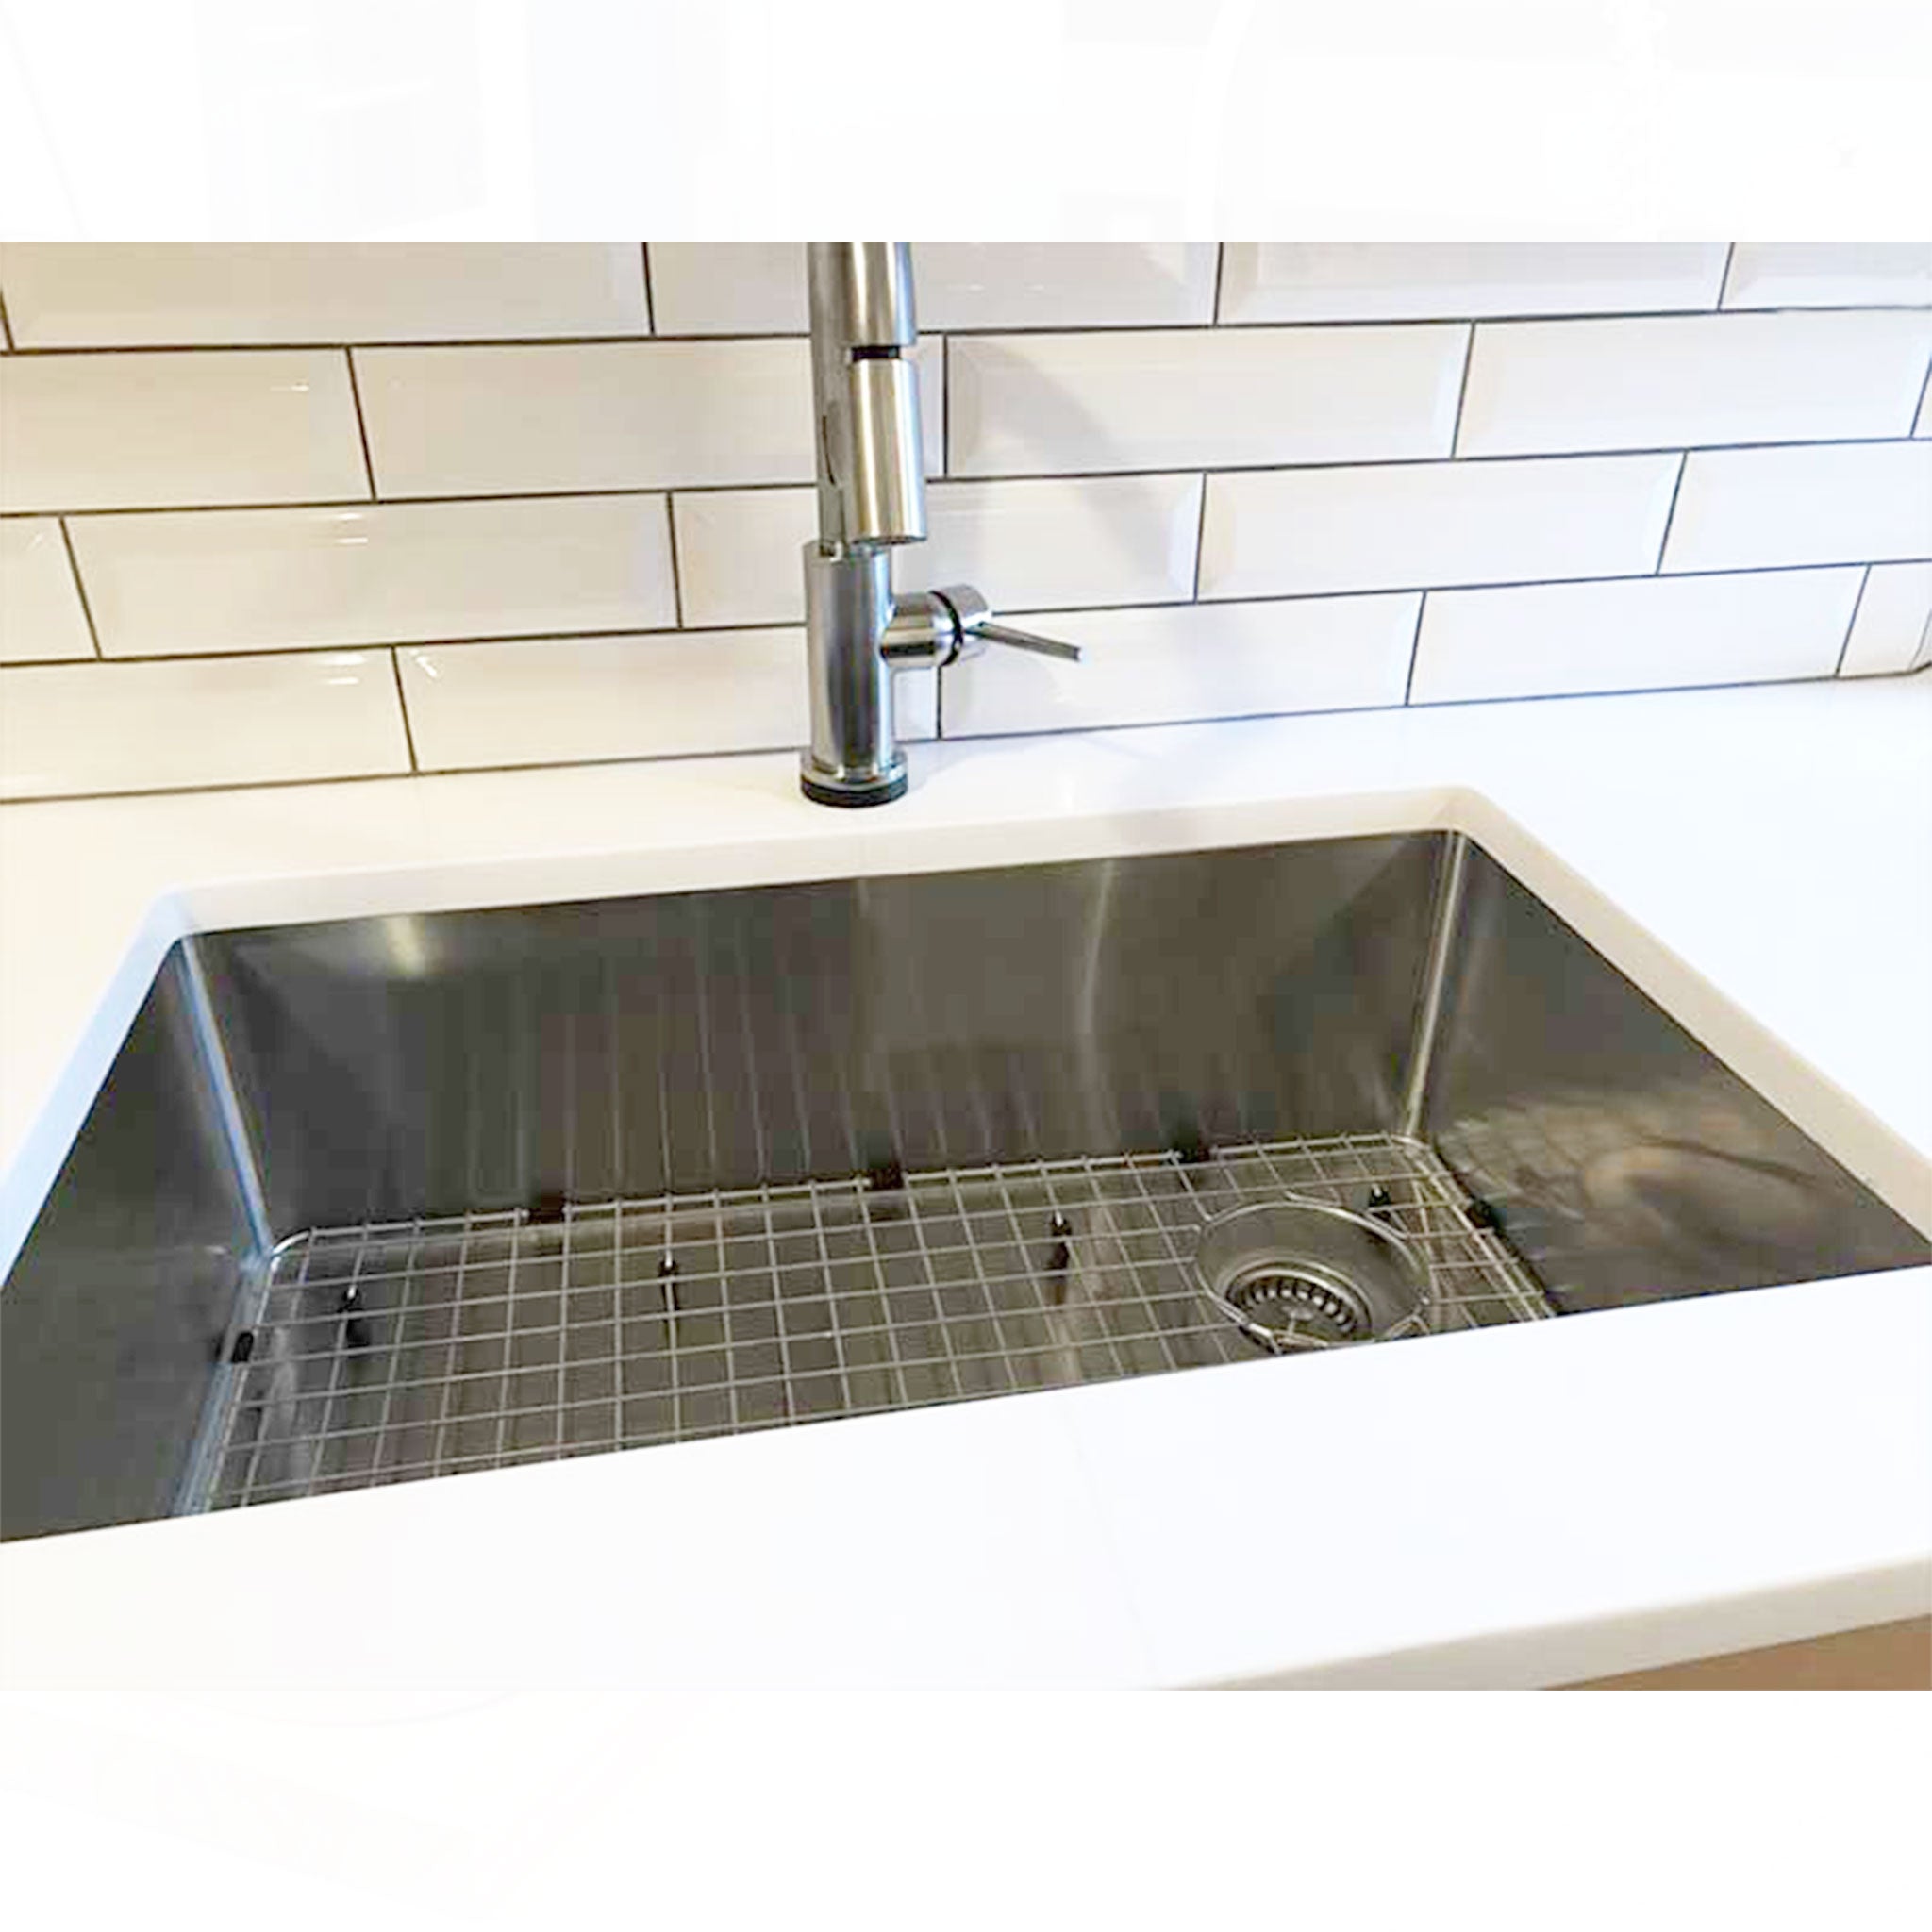 Client picture of a 30”, classic, stainless-steel kitchen sink from Create Good Sinks with a seamless drain and basin grid.